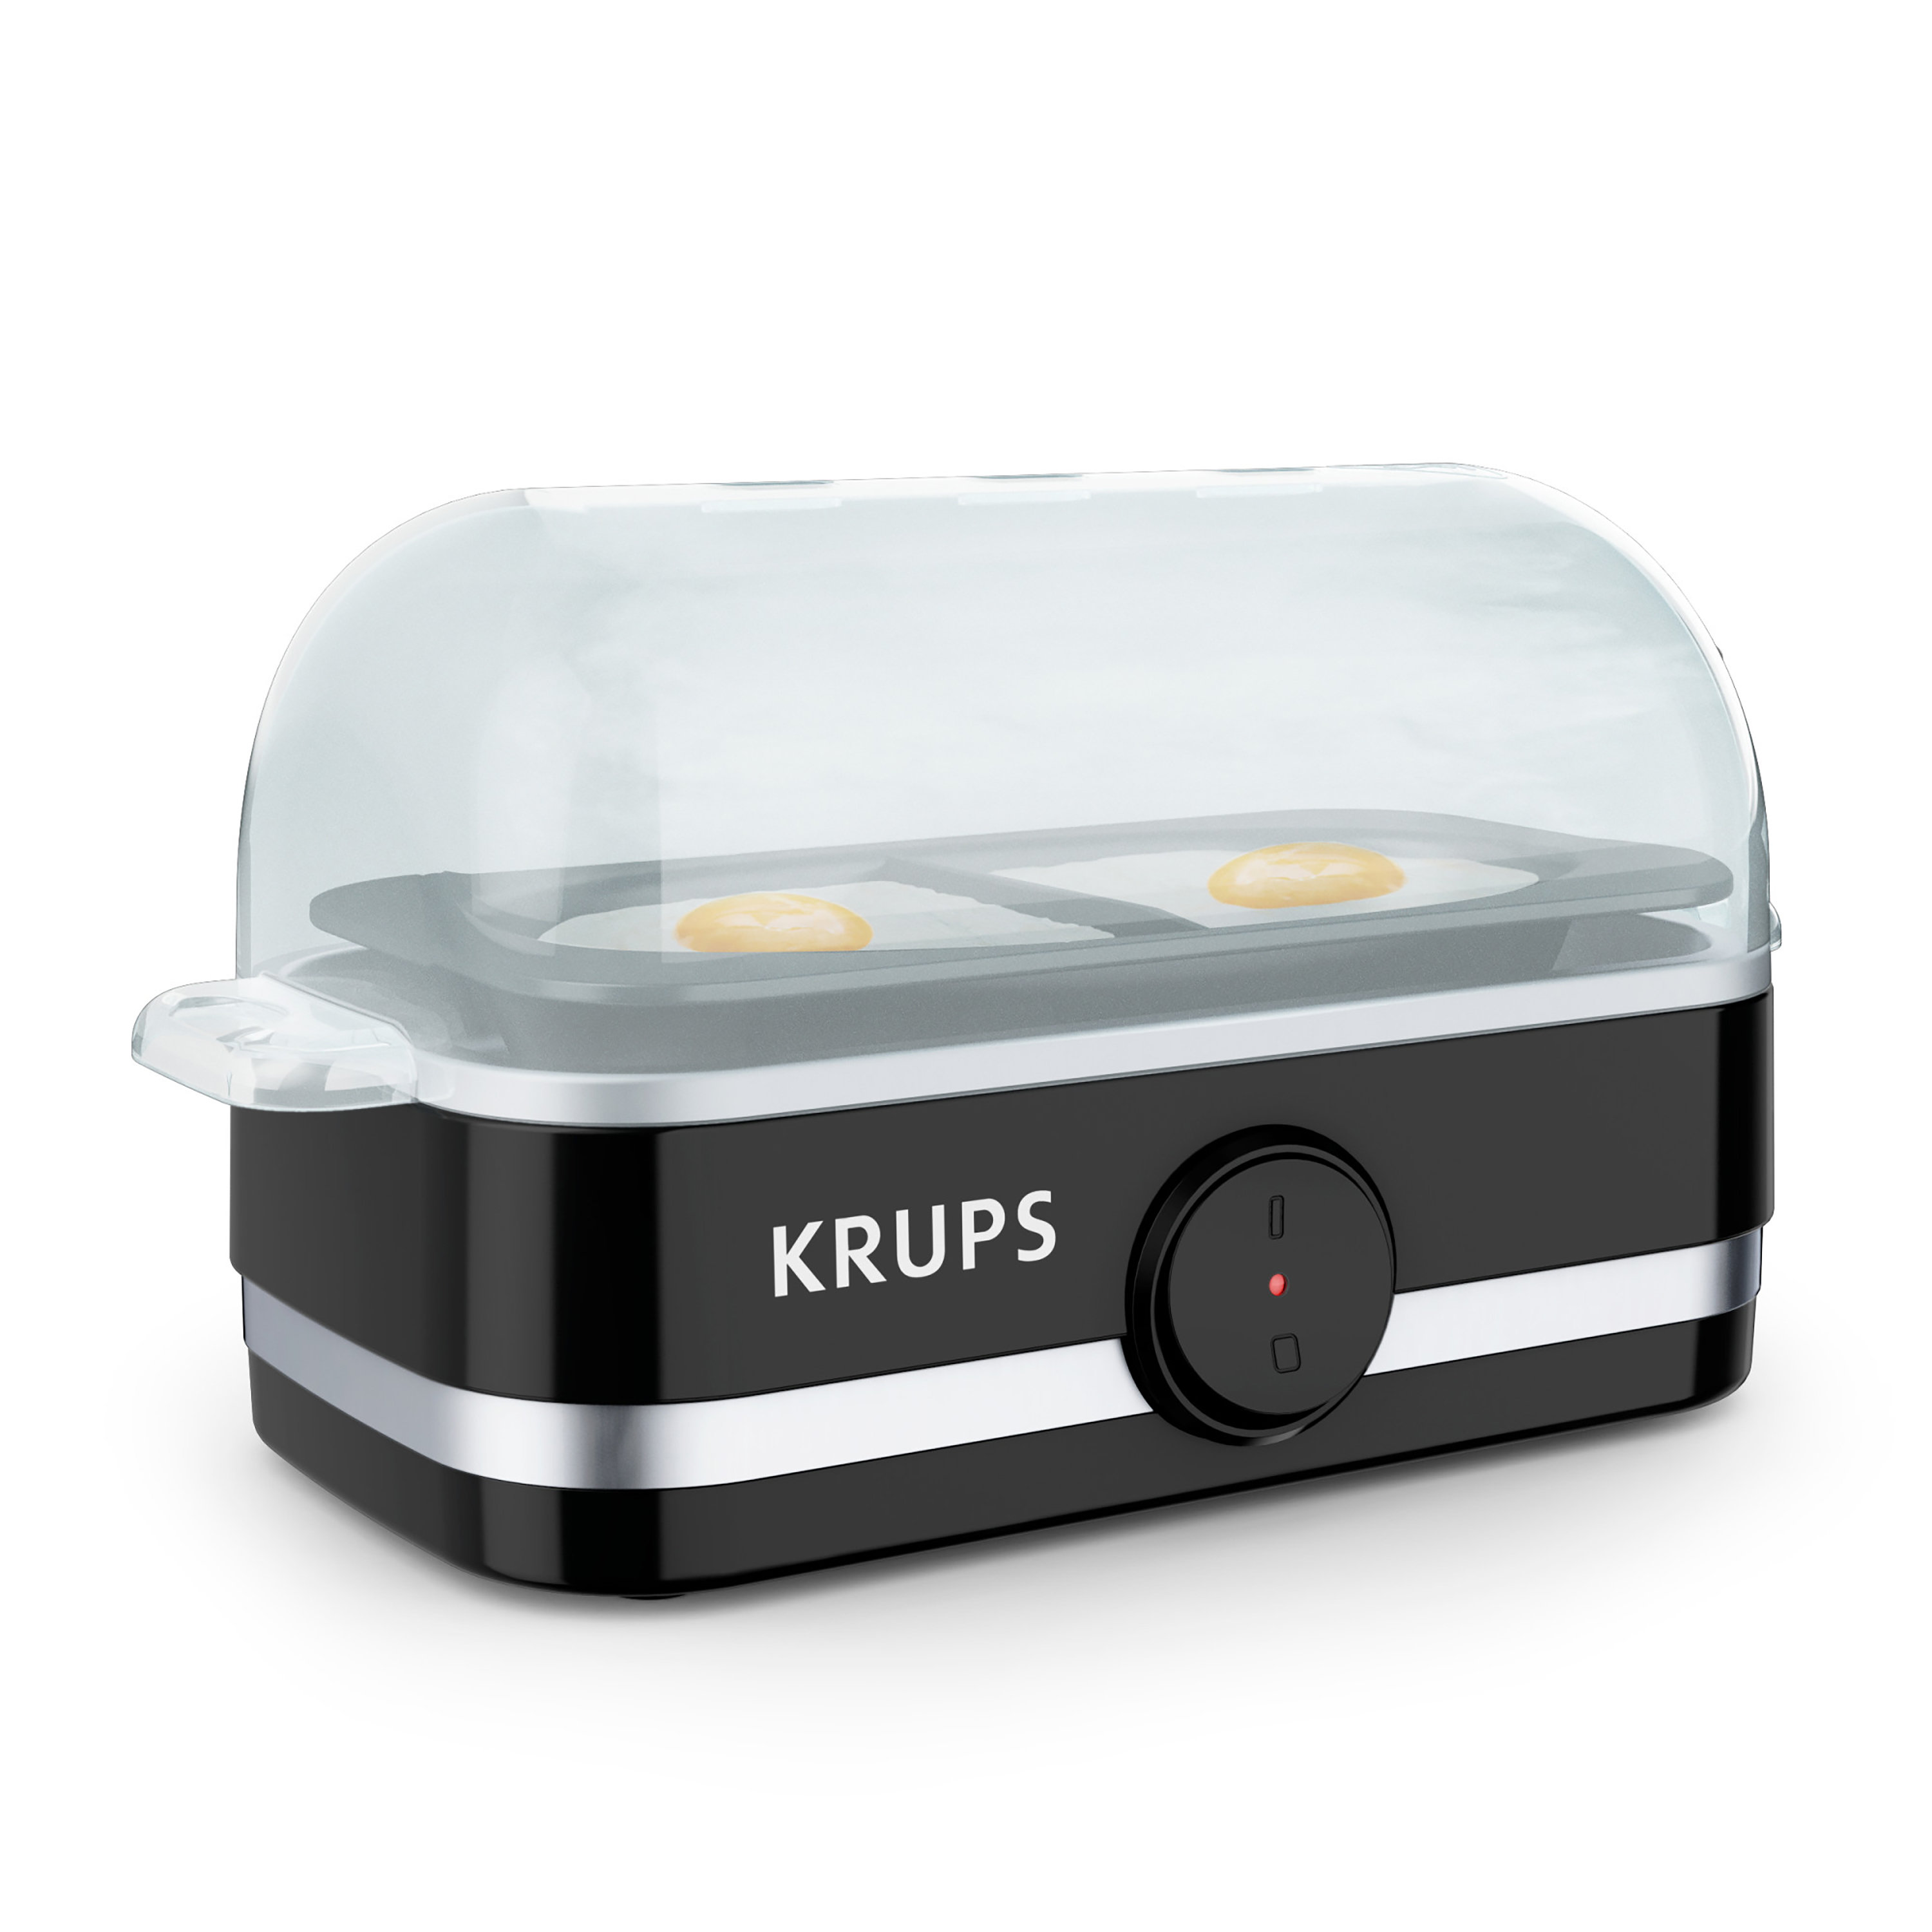 Krups Simply Electric Egg Cooker With Accessories. 6 Egg Capacity & Reviews